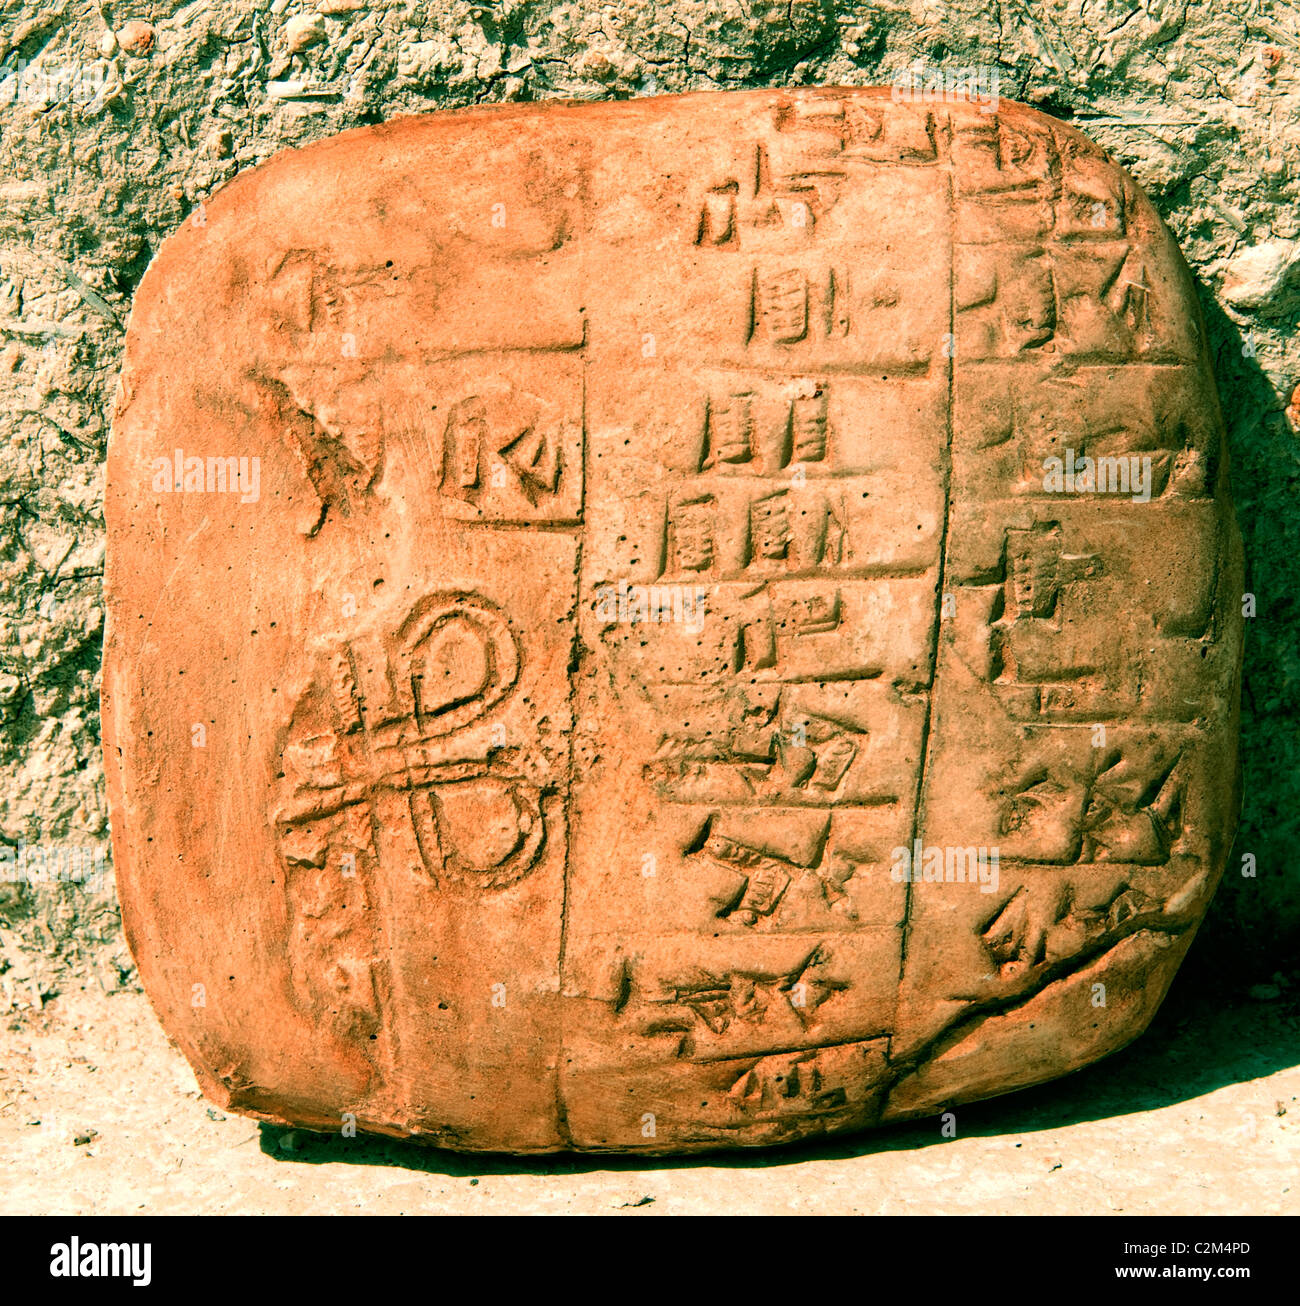 New copy Tablet Ebla Syria Aleppo 3000 BC - 1650 BC 20,000 cuneiform tablets found there Semitic language related Akkadian Stock Photo